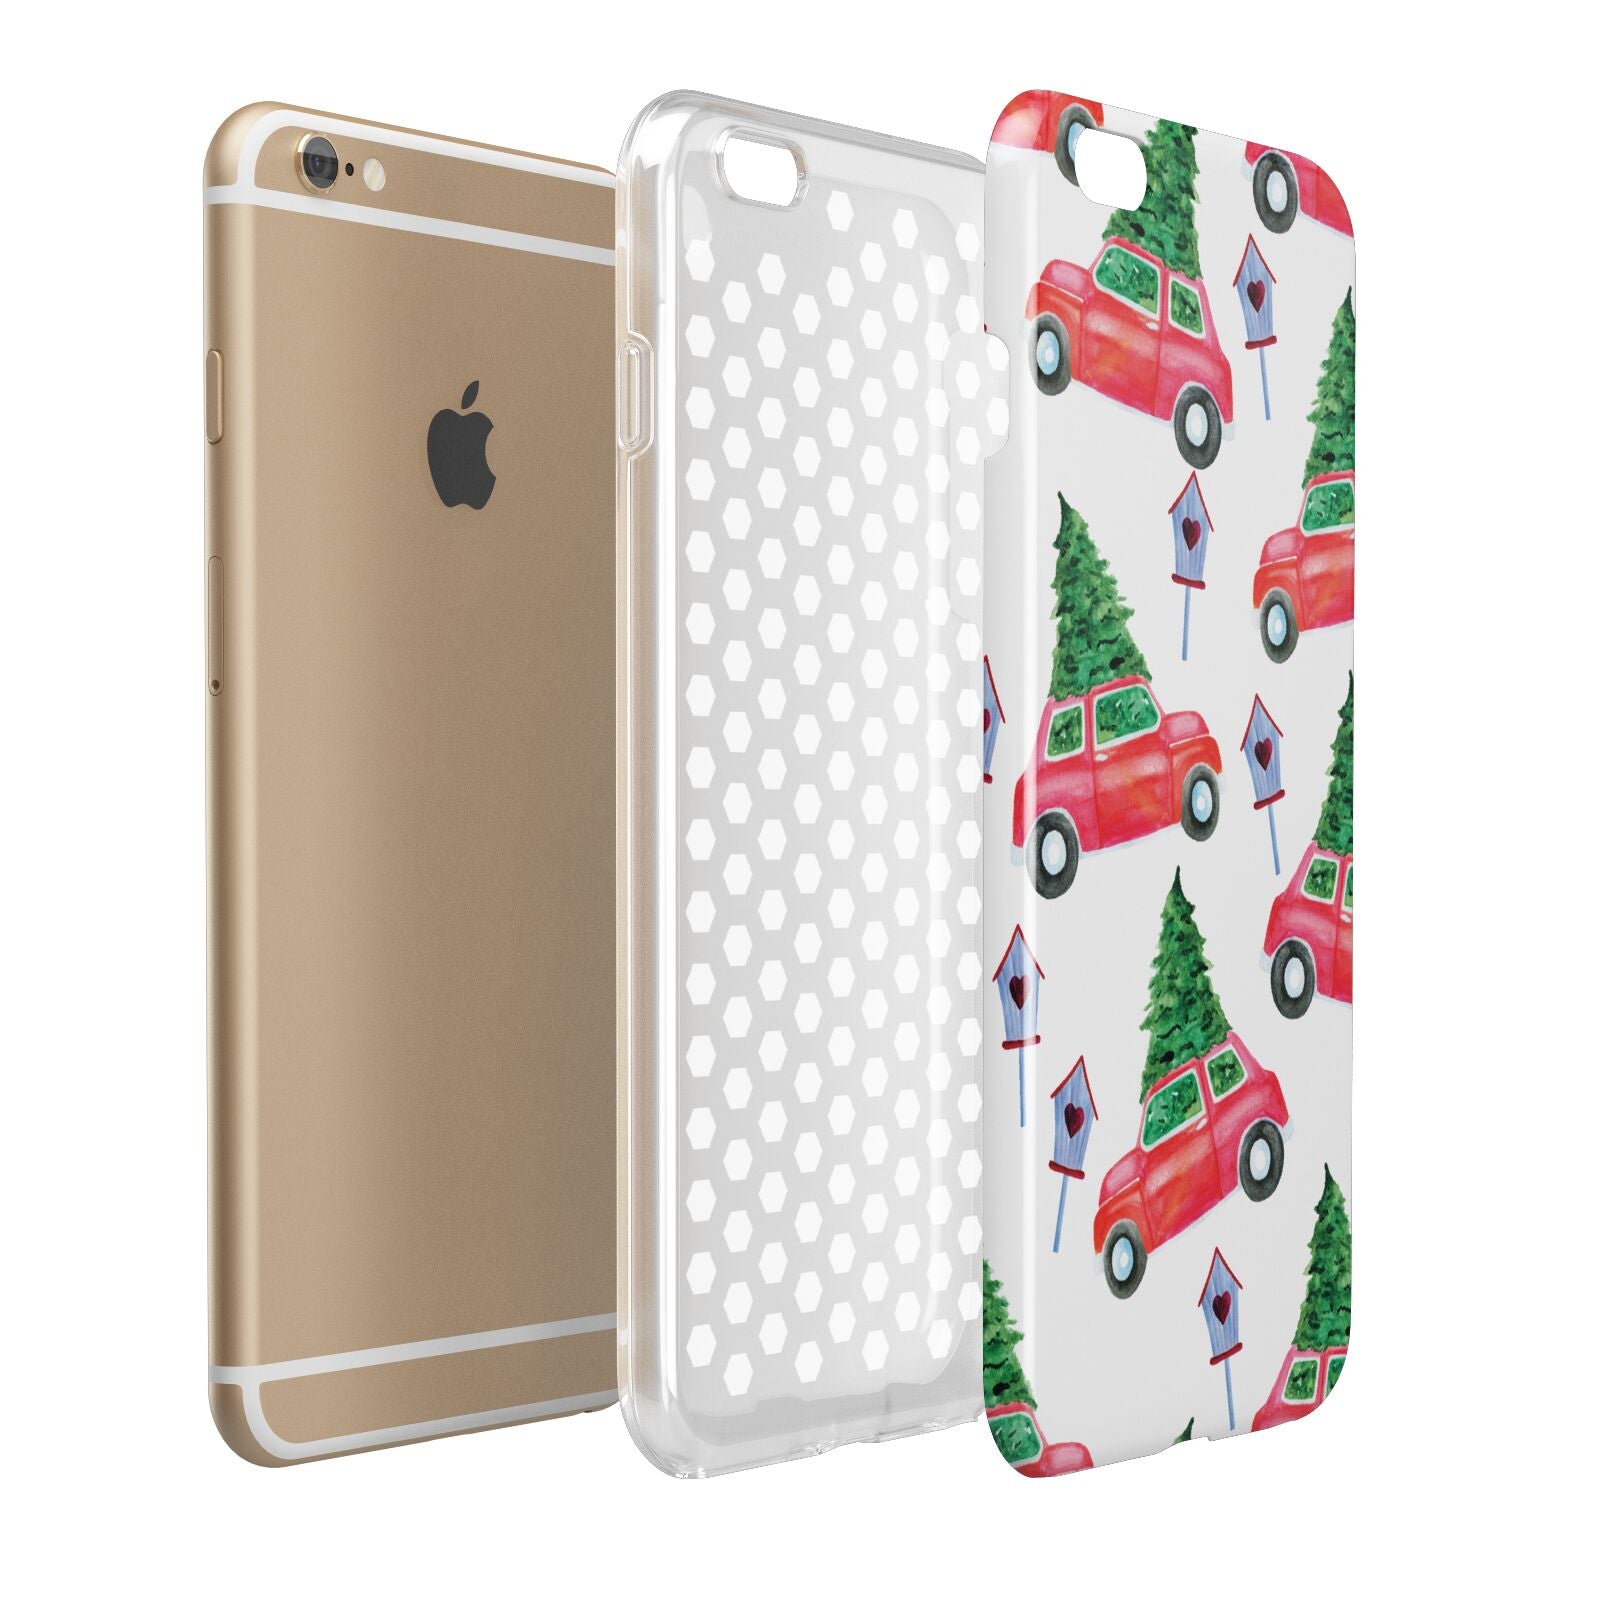 Driving home for Christmas Apple iPhone 6 Plus 3D Tough Case Expand Detail Image